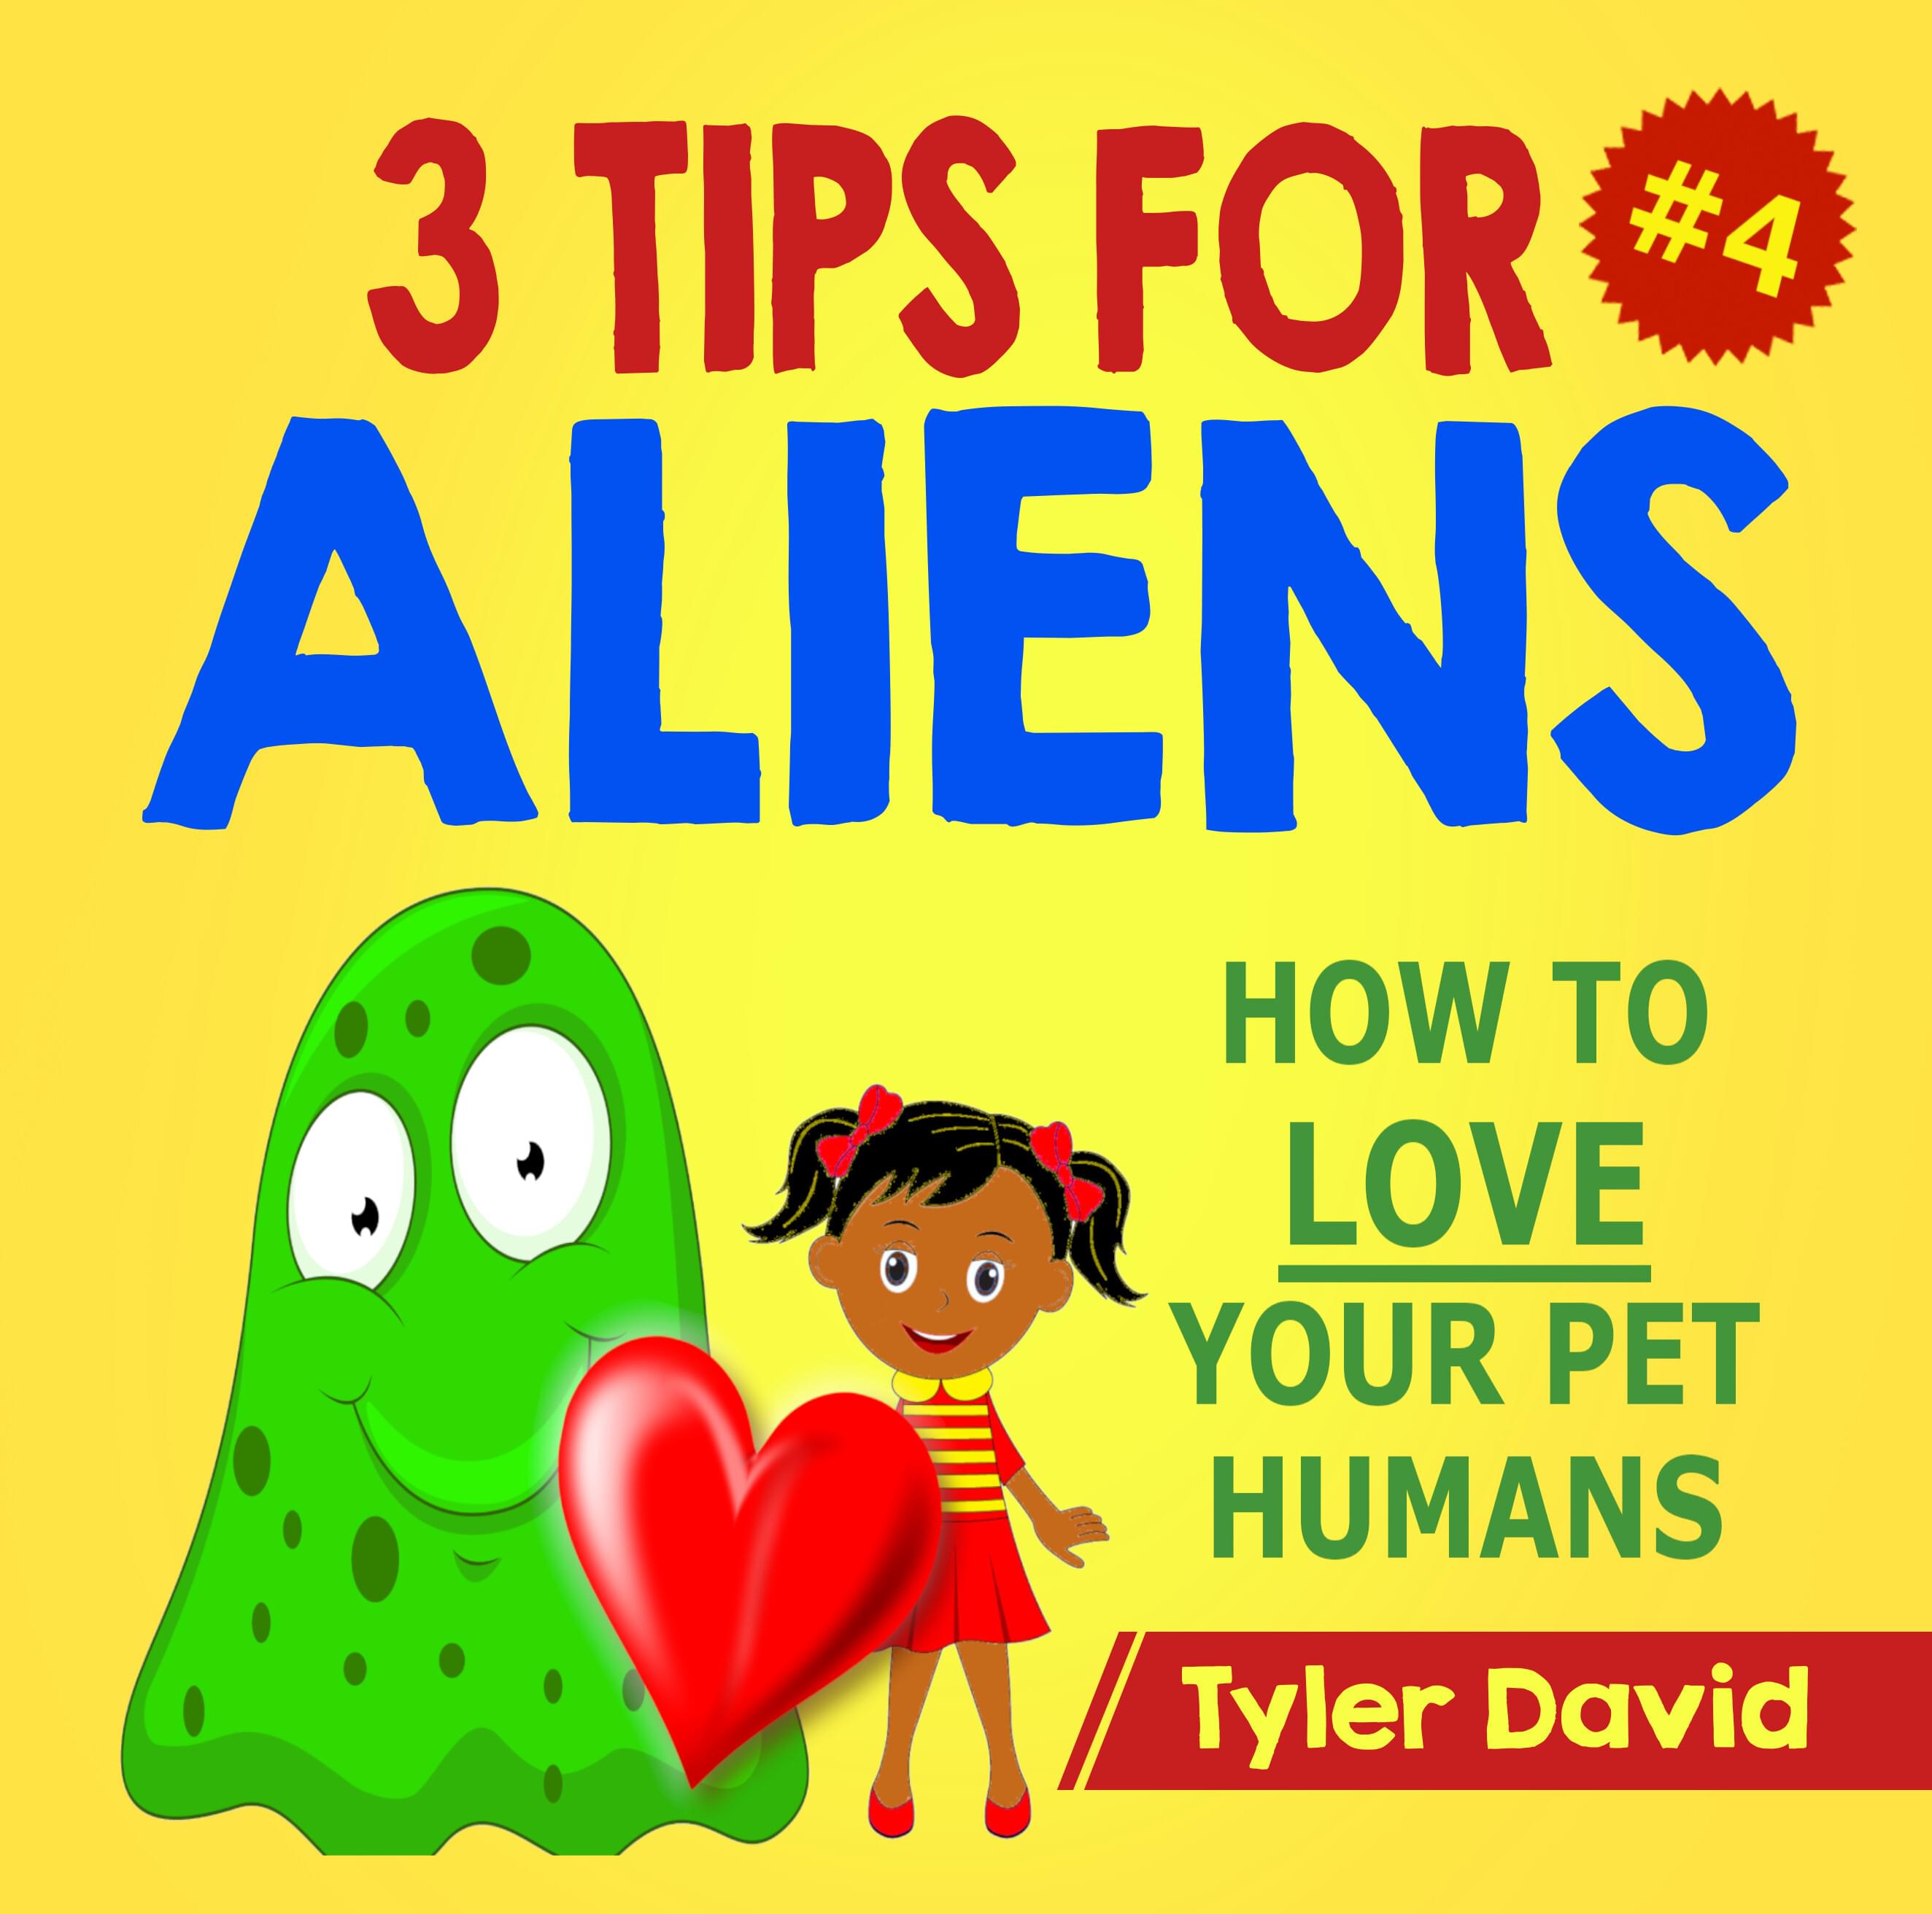 3 Tips for Aliens - How to love your pet humans